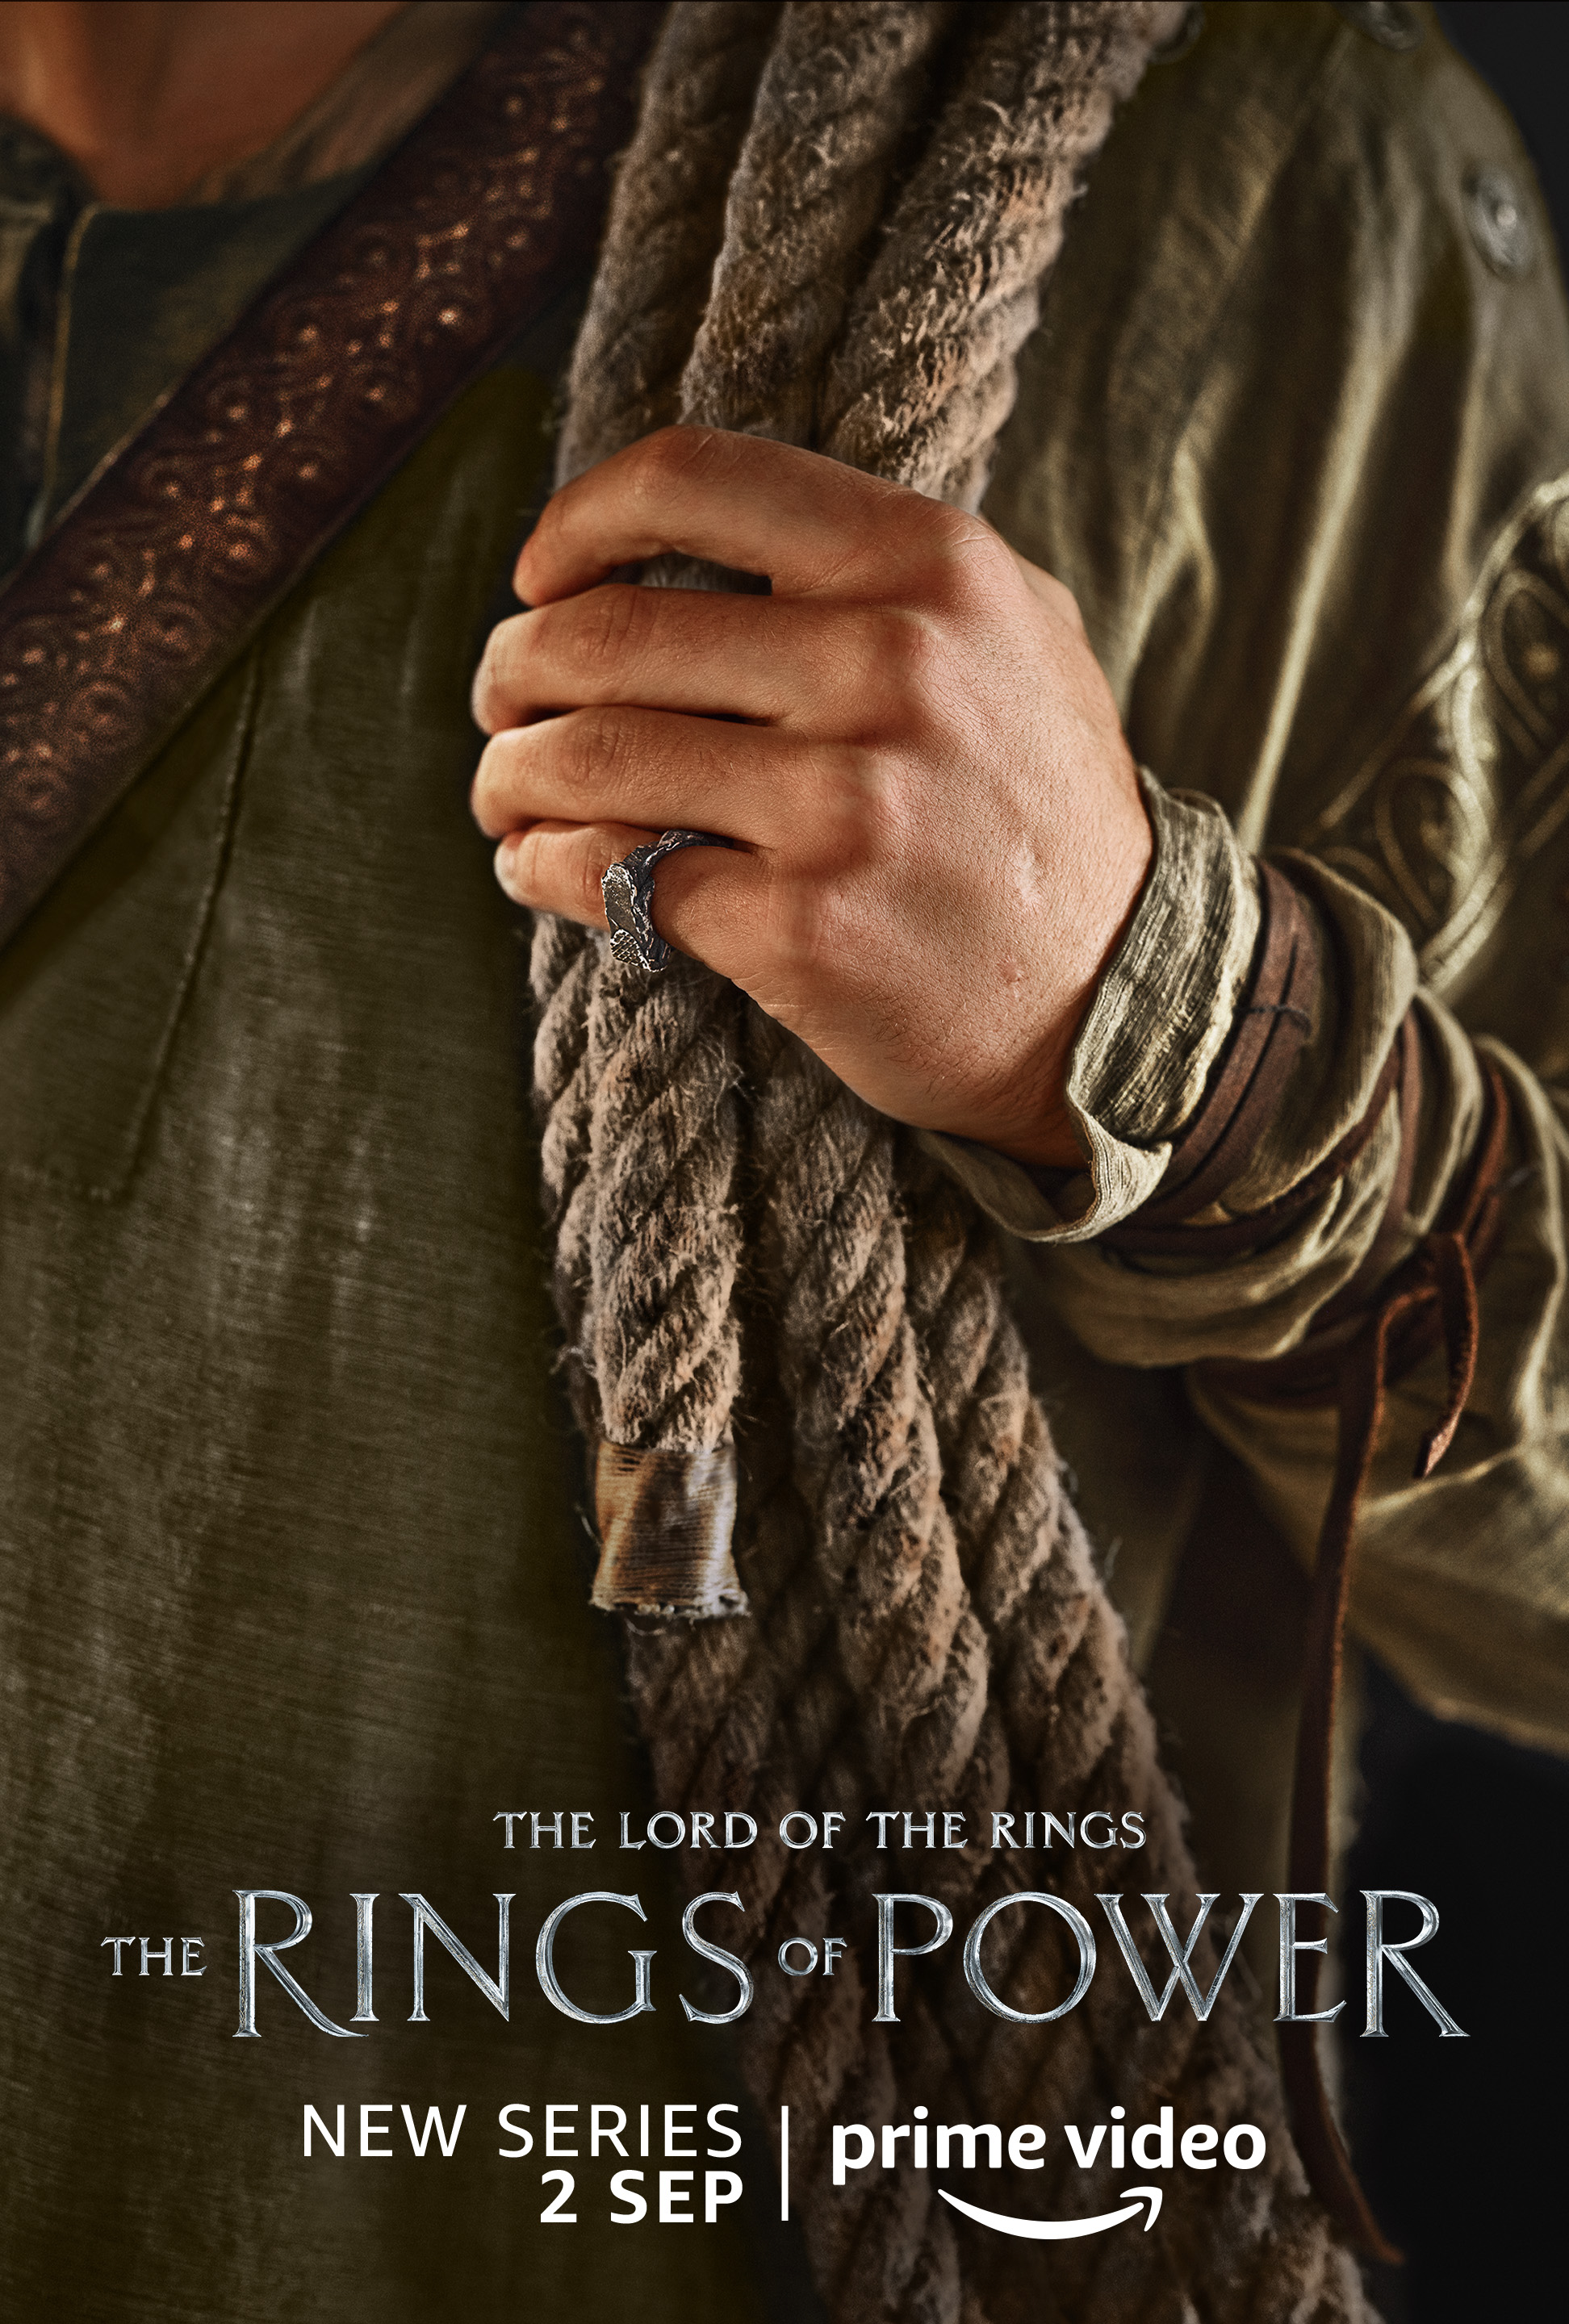 A human holding a rope character poster for Lord of the Rings: The Rings of Power